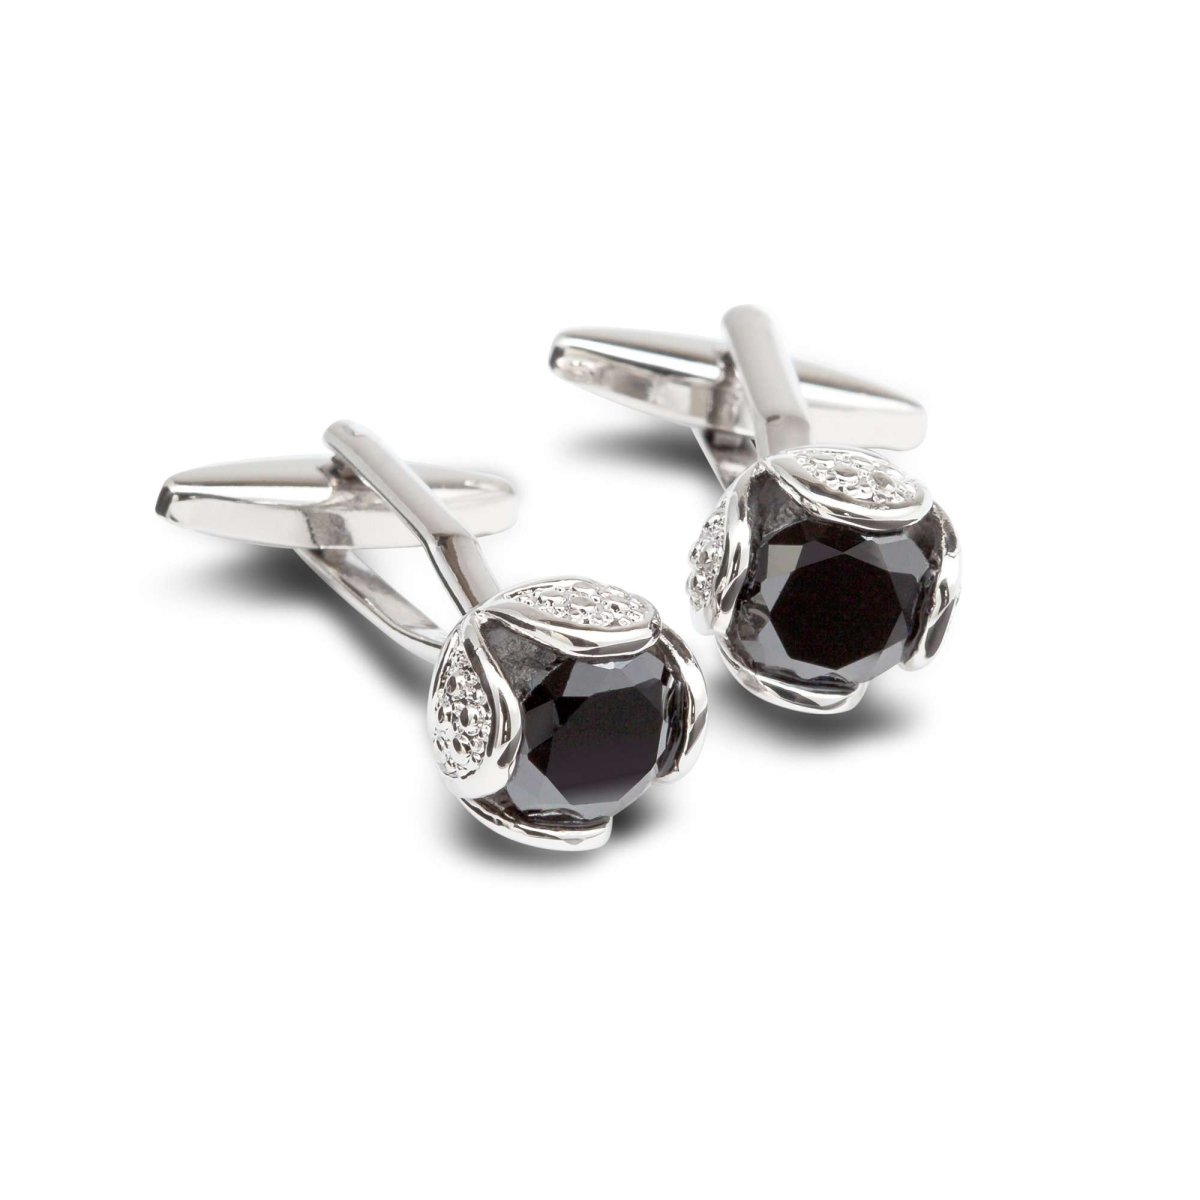 Wrapped Onyx Cufflinks - MenSuits